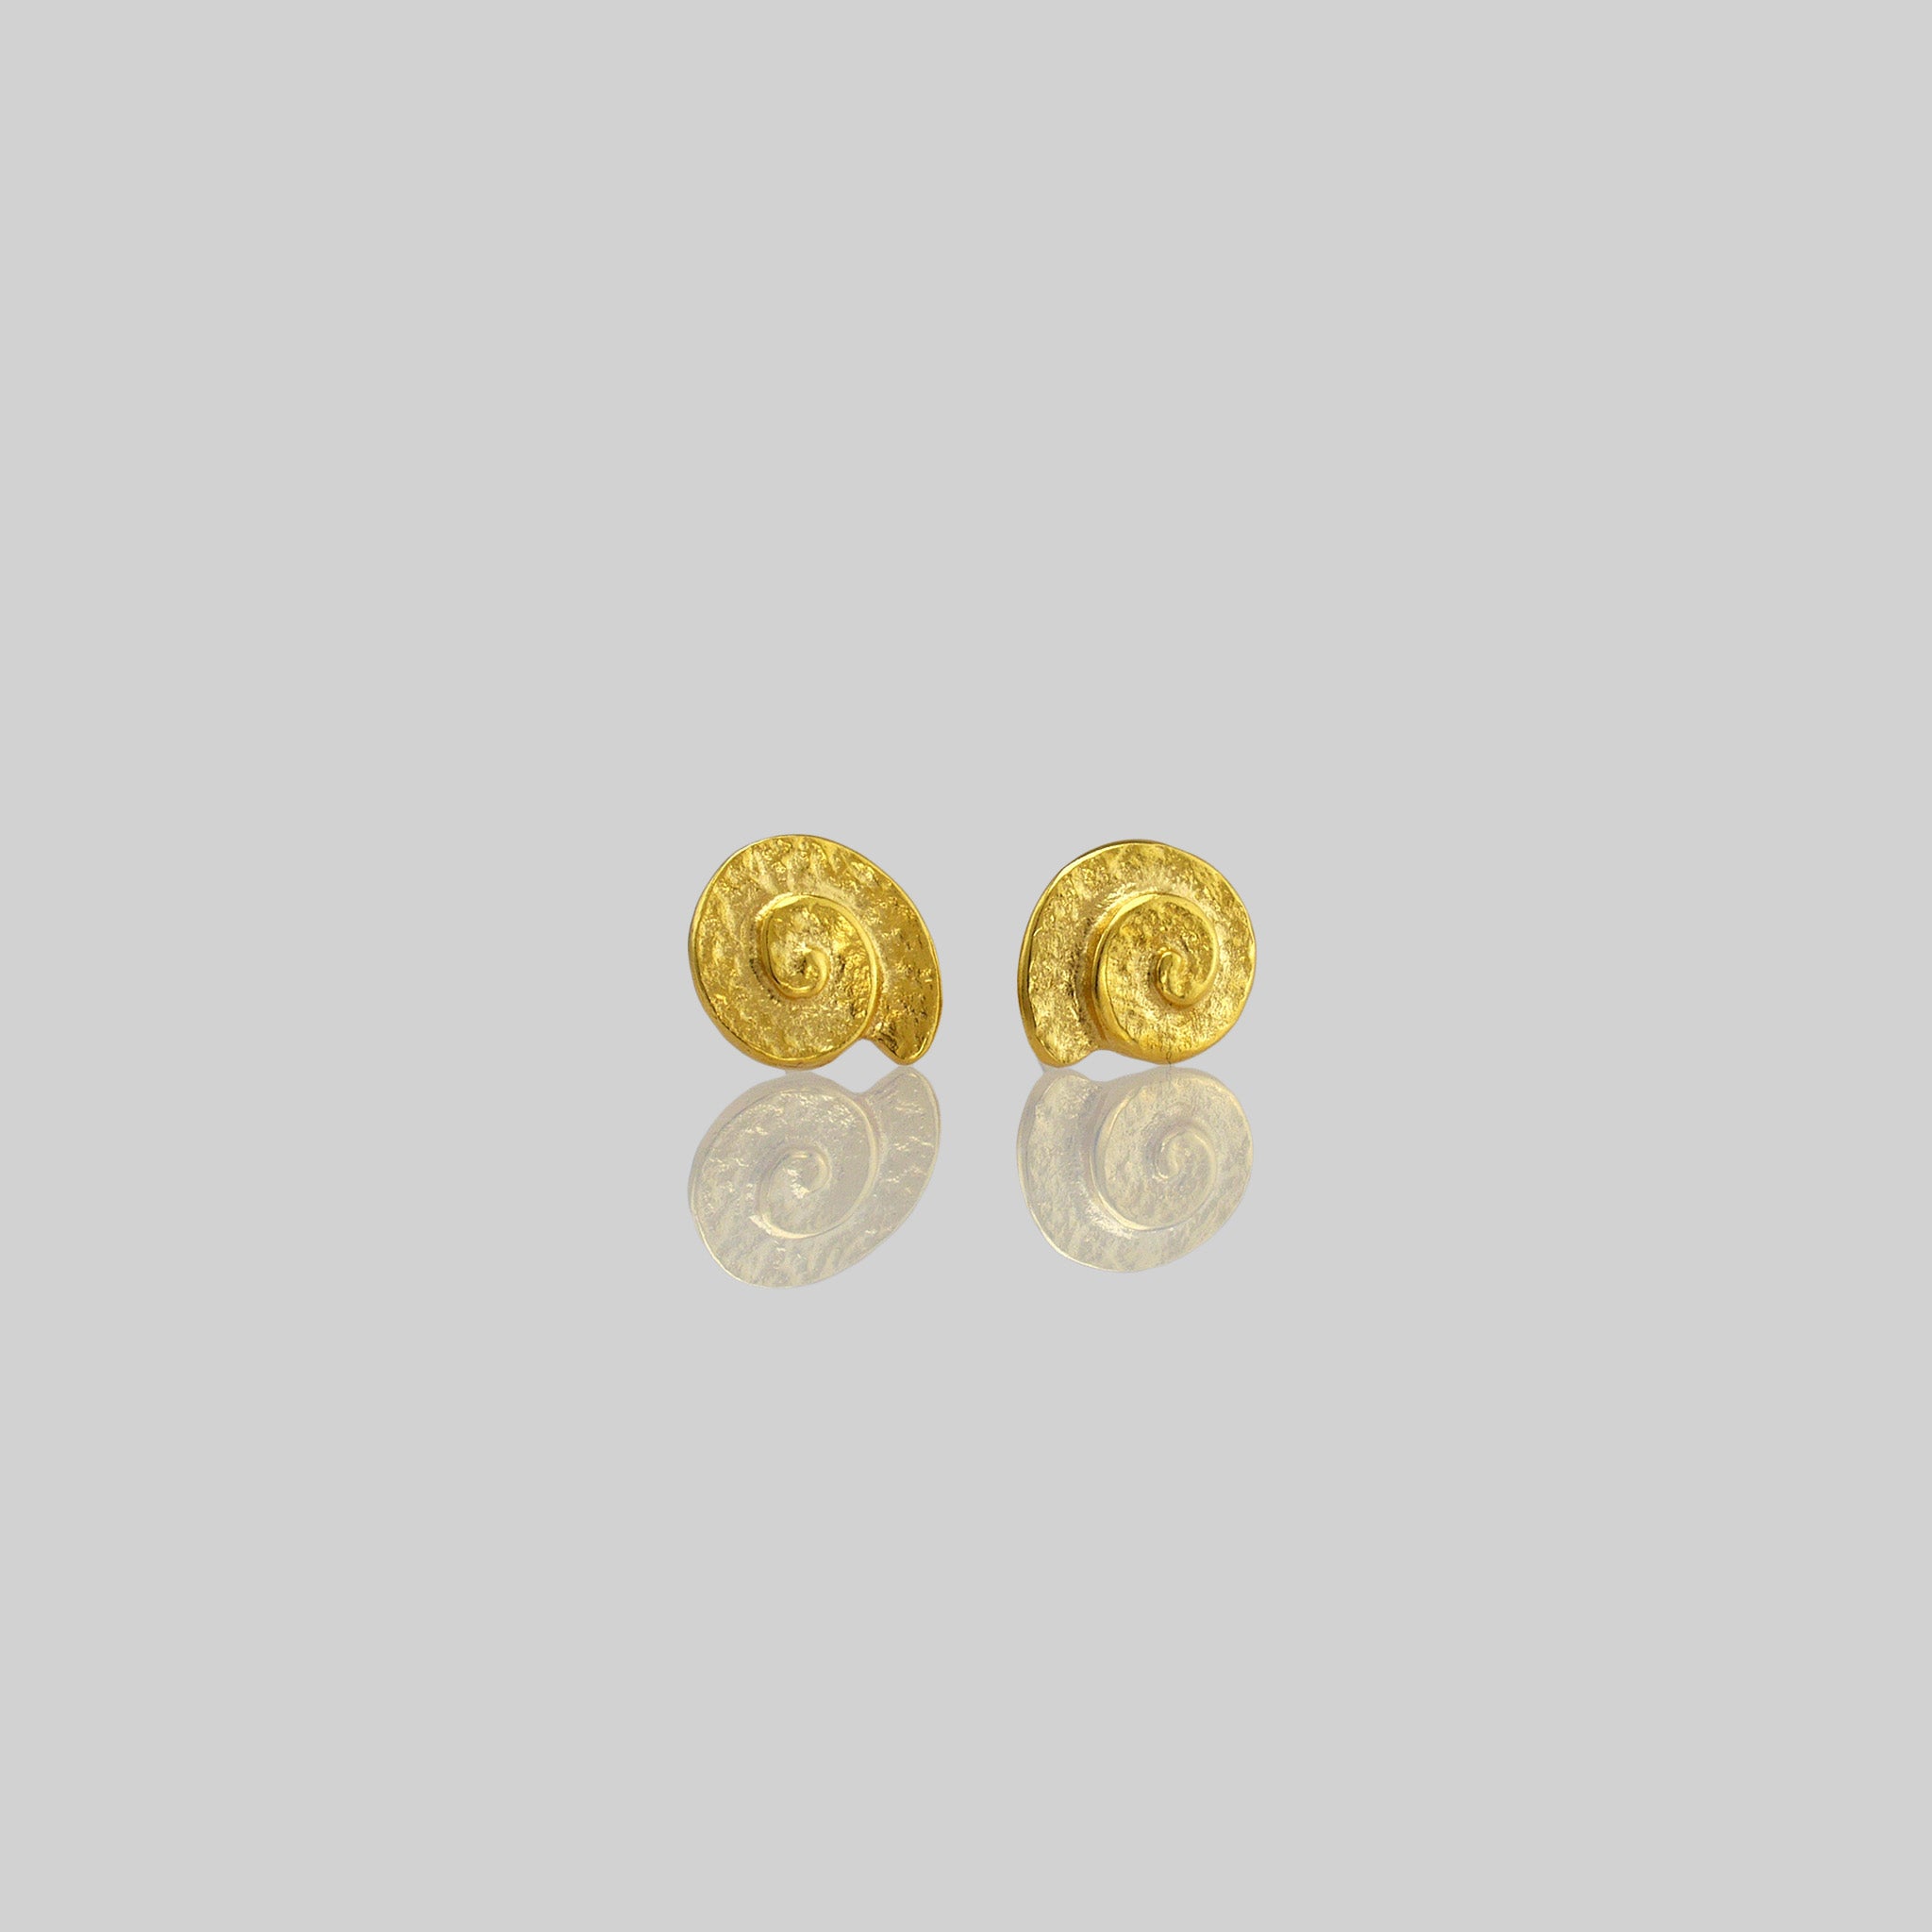 Classic and elegant yellow gold stud earrings with a textured arched spiral.